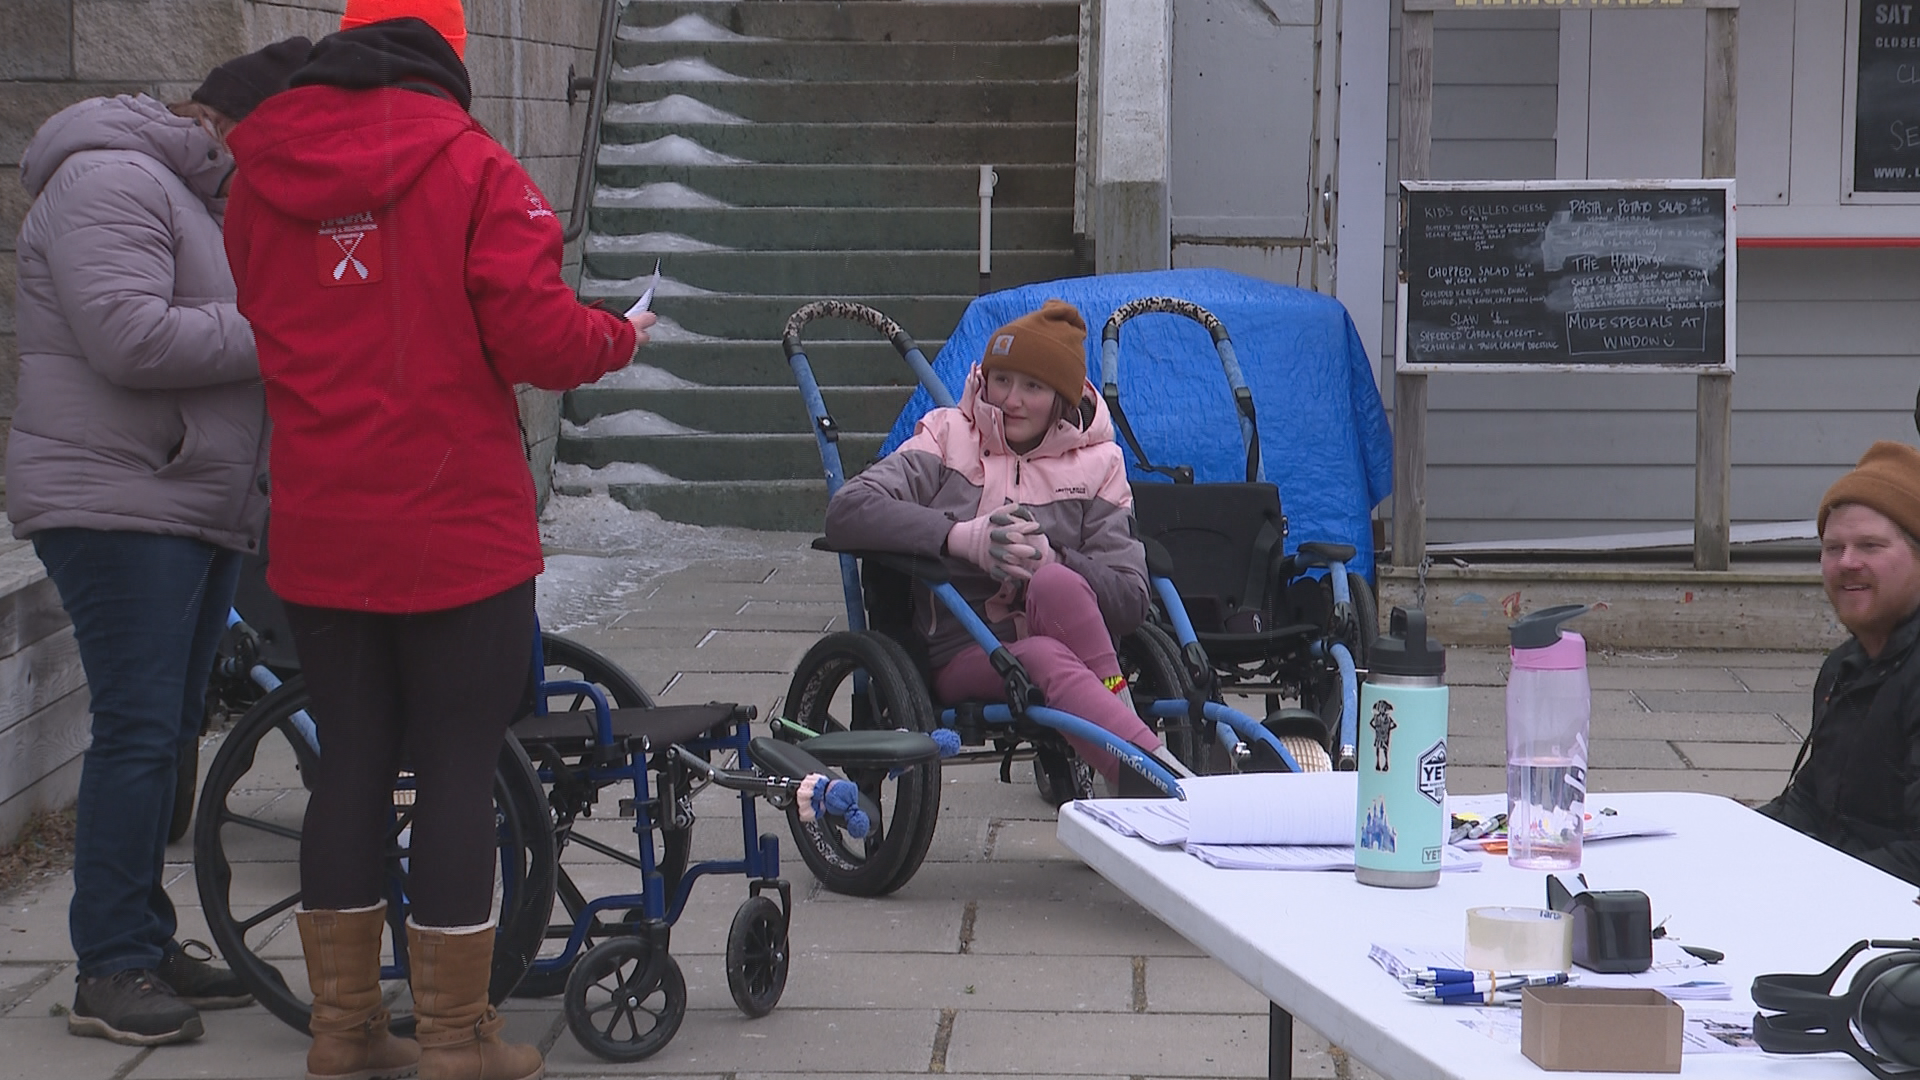 ‘Important’ accessibility equipment for winter activities showcased in HRM event – Halifax | Globalnews.ca